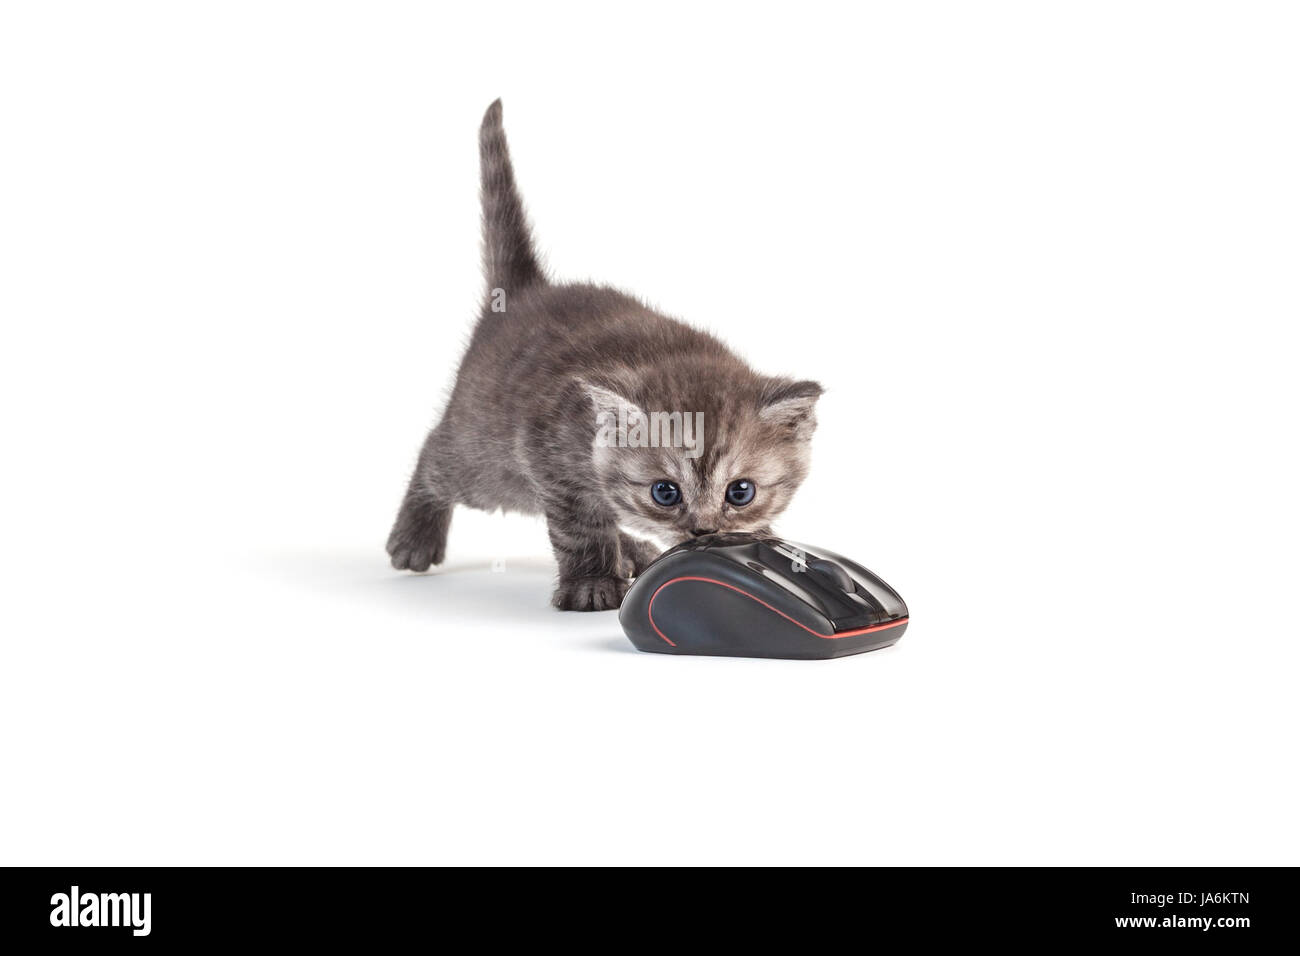 cat and mouse Stock Photo